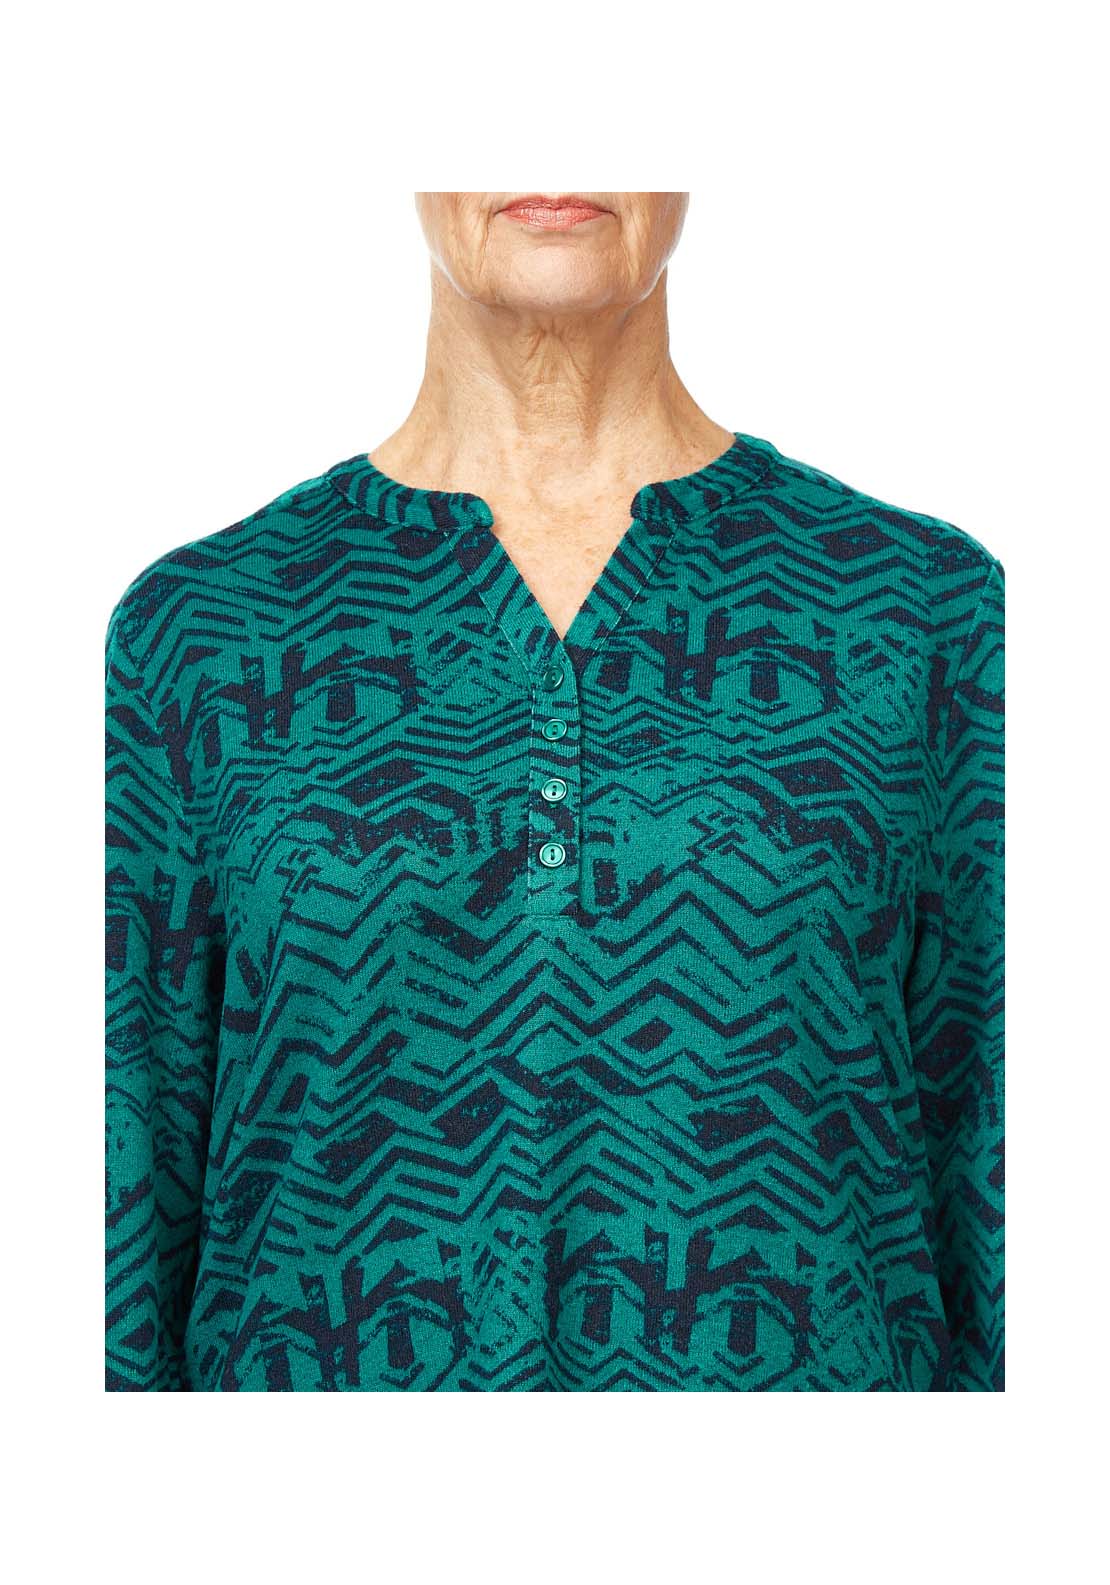 Tigiwear Azure Abstract Print Top 5 Shaws Department Stores